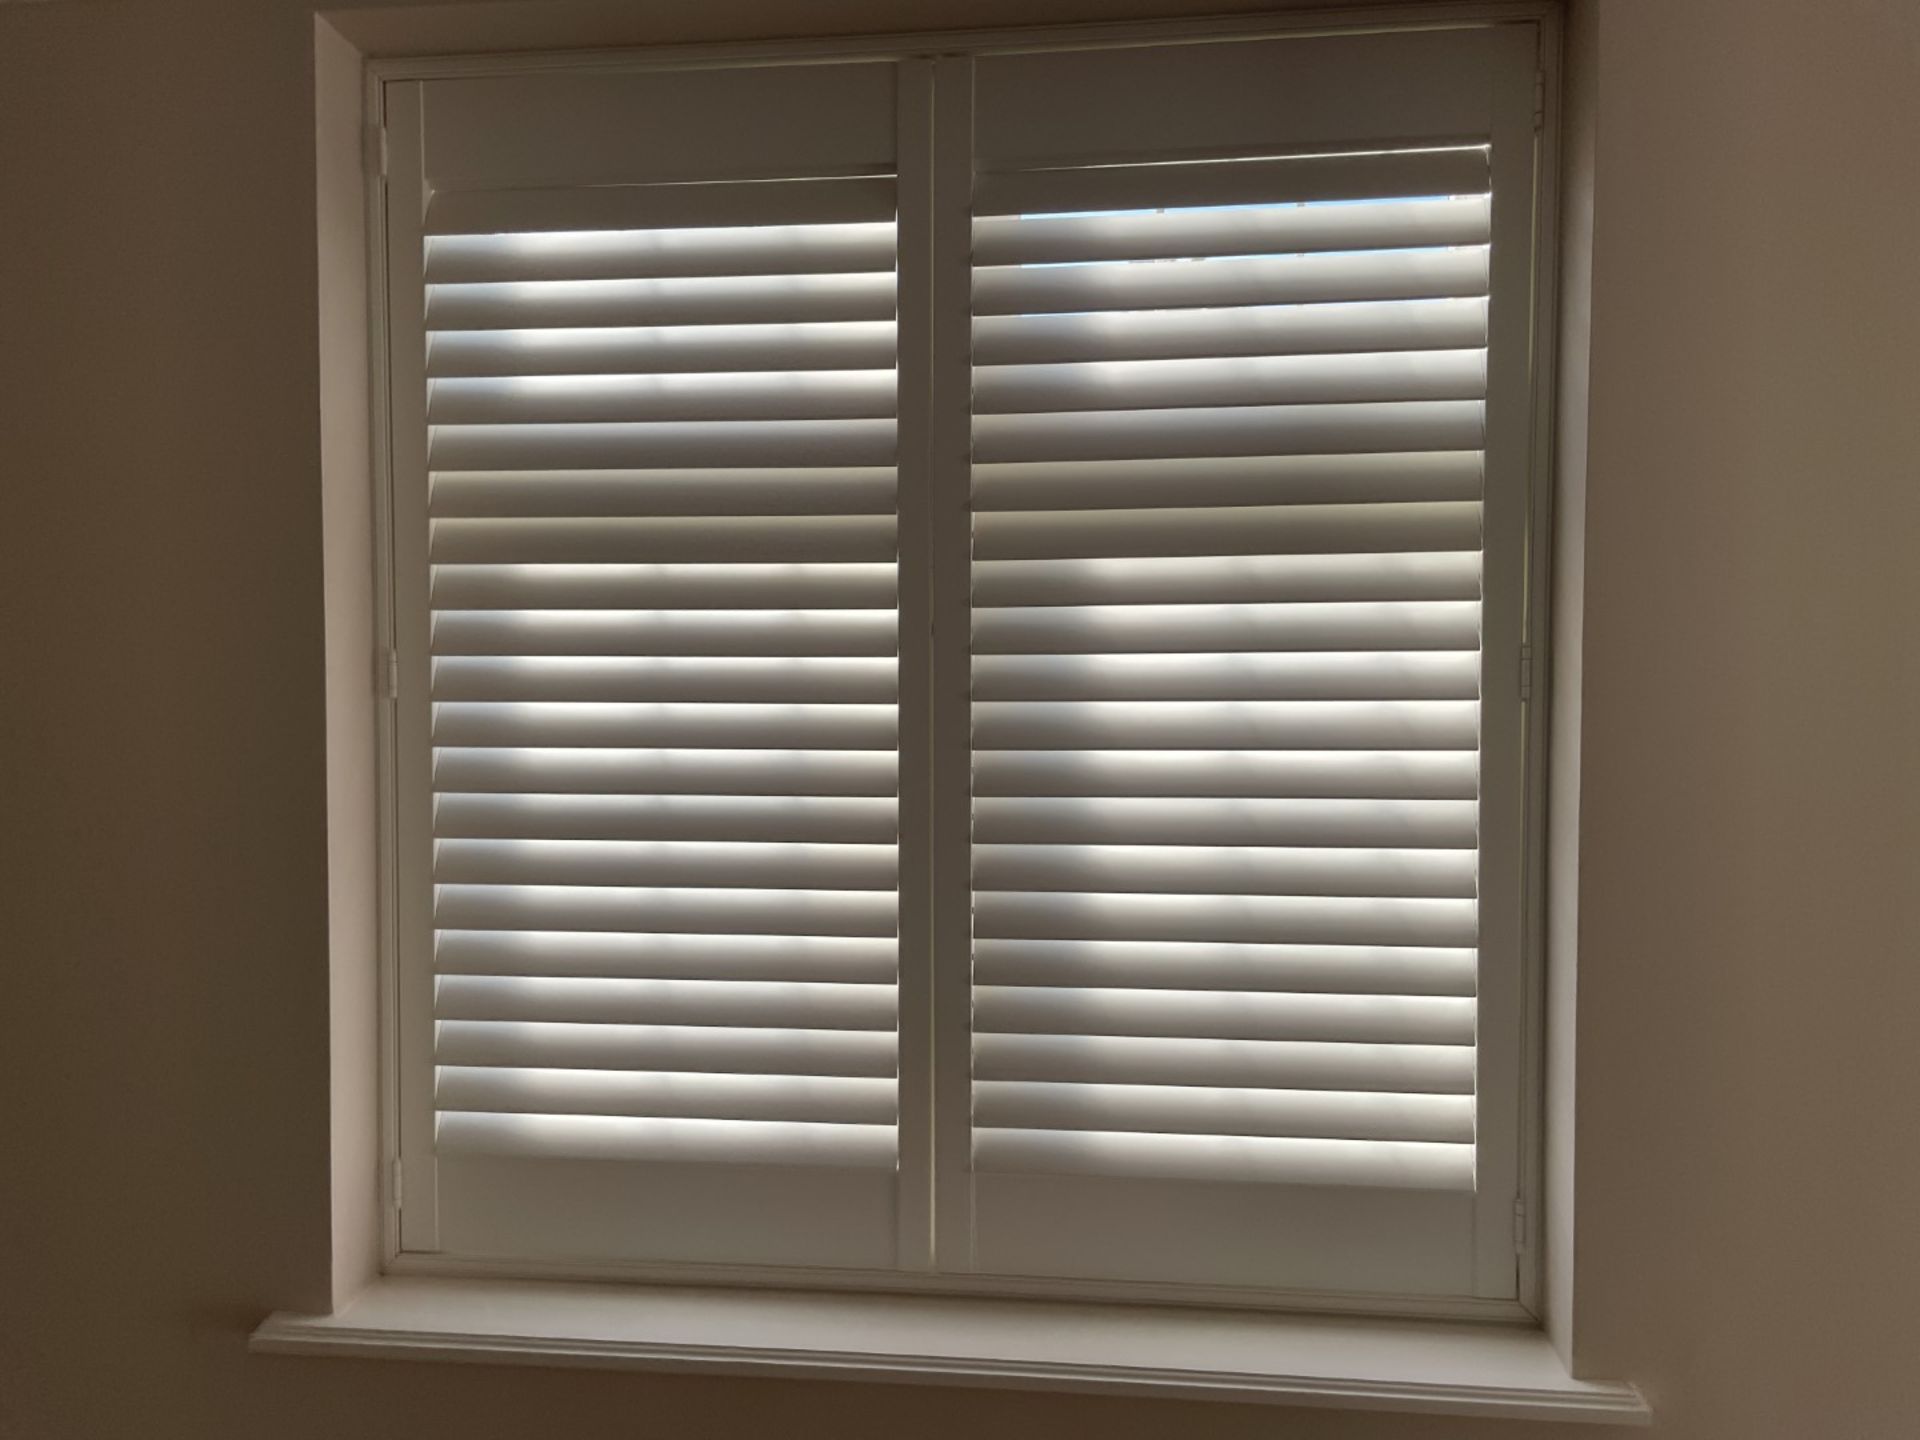 1 x Hardwood Timber Double Glazed Window Frames fitted with Shutter Blinds, In White - Ref: PAN105 - Image 3 of 11